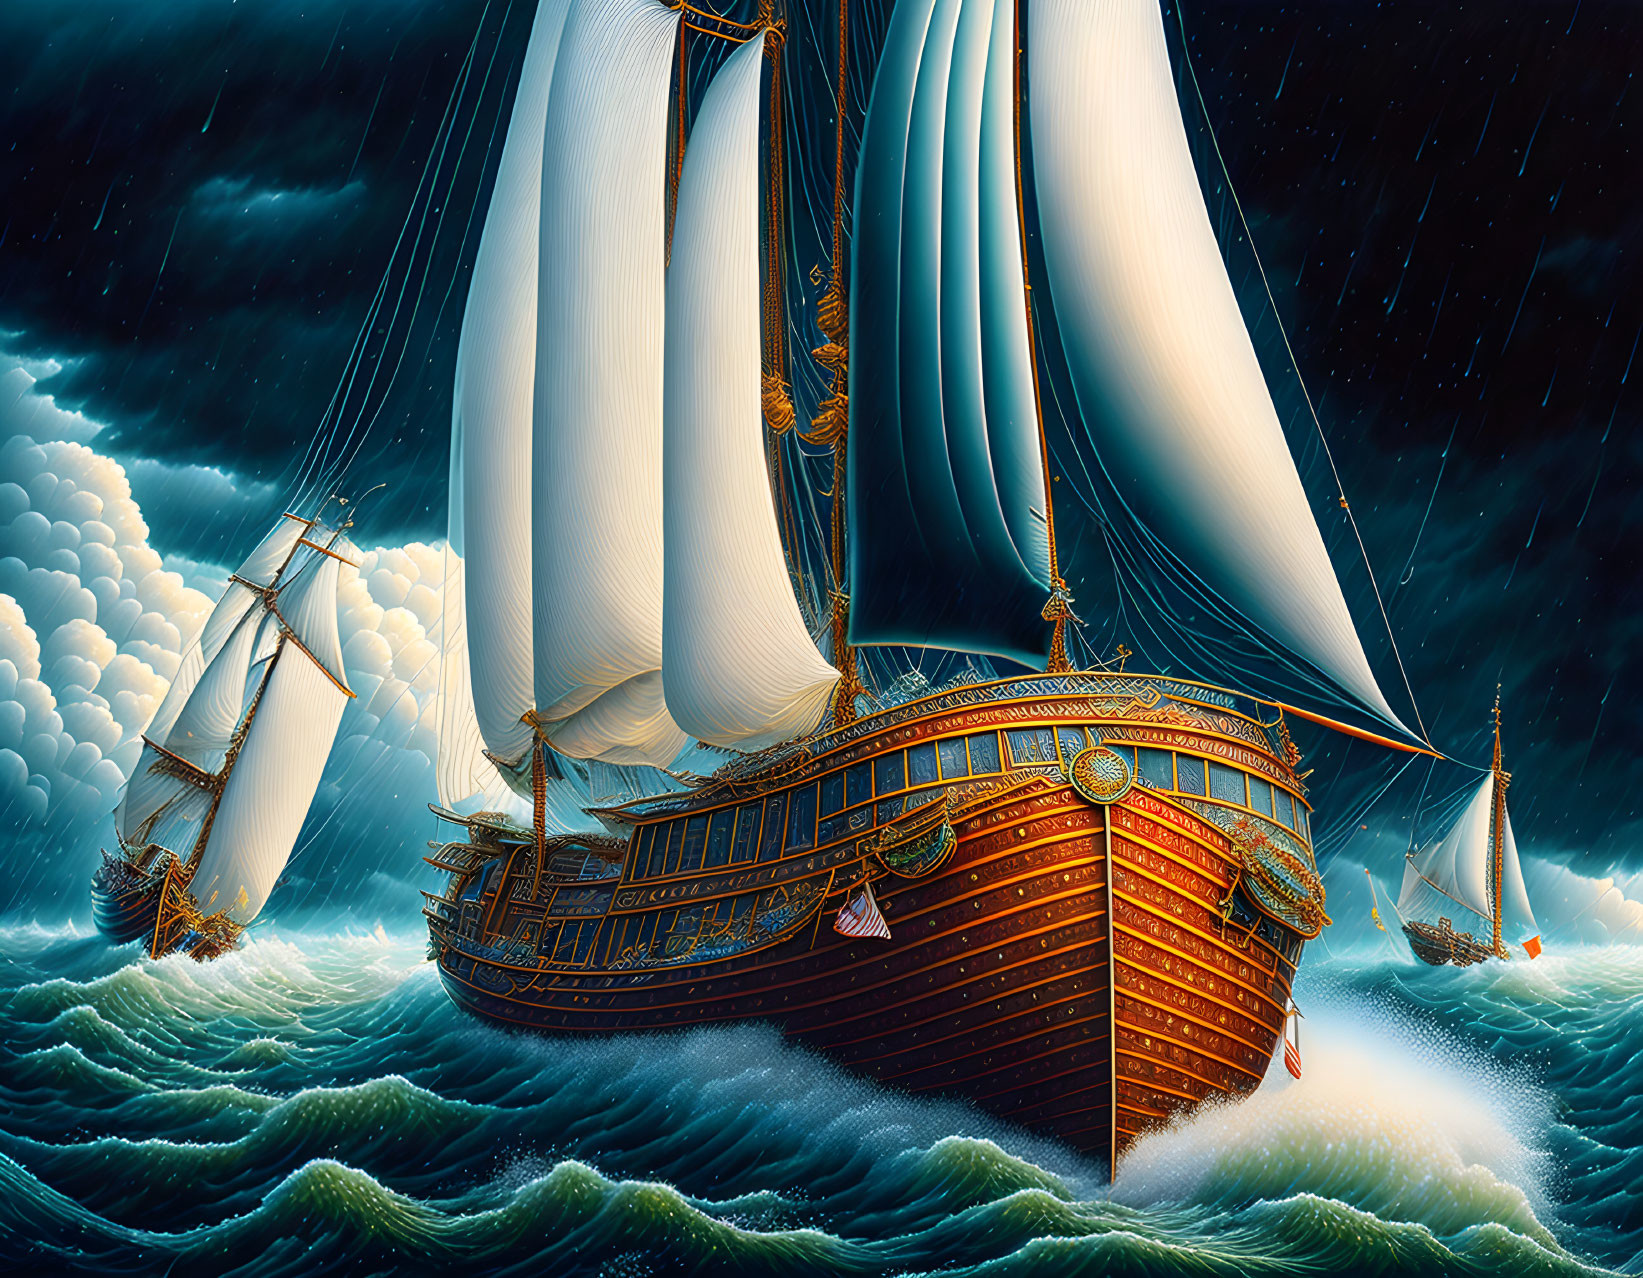 Majestic sailing ships on tumultuous ocean waves